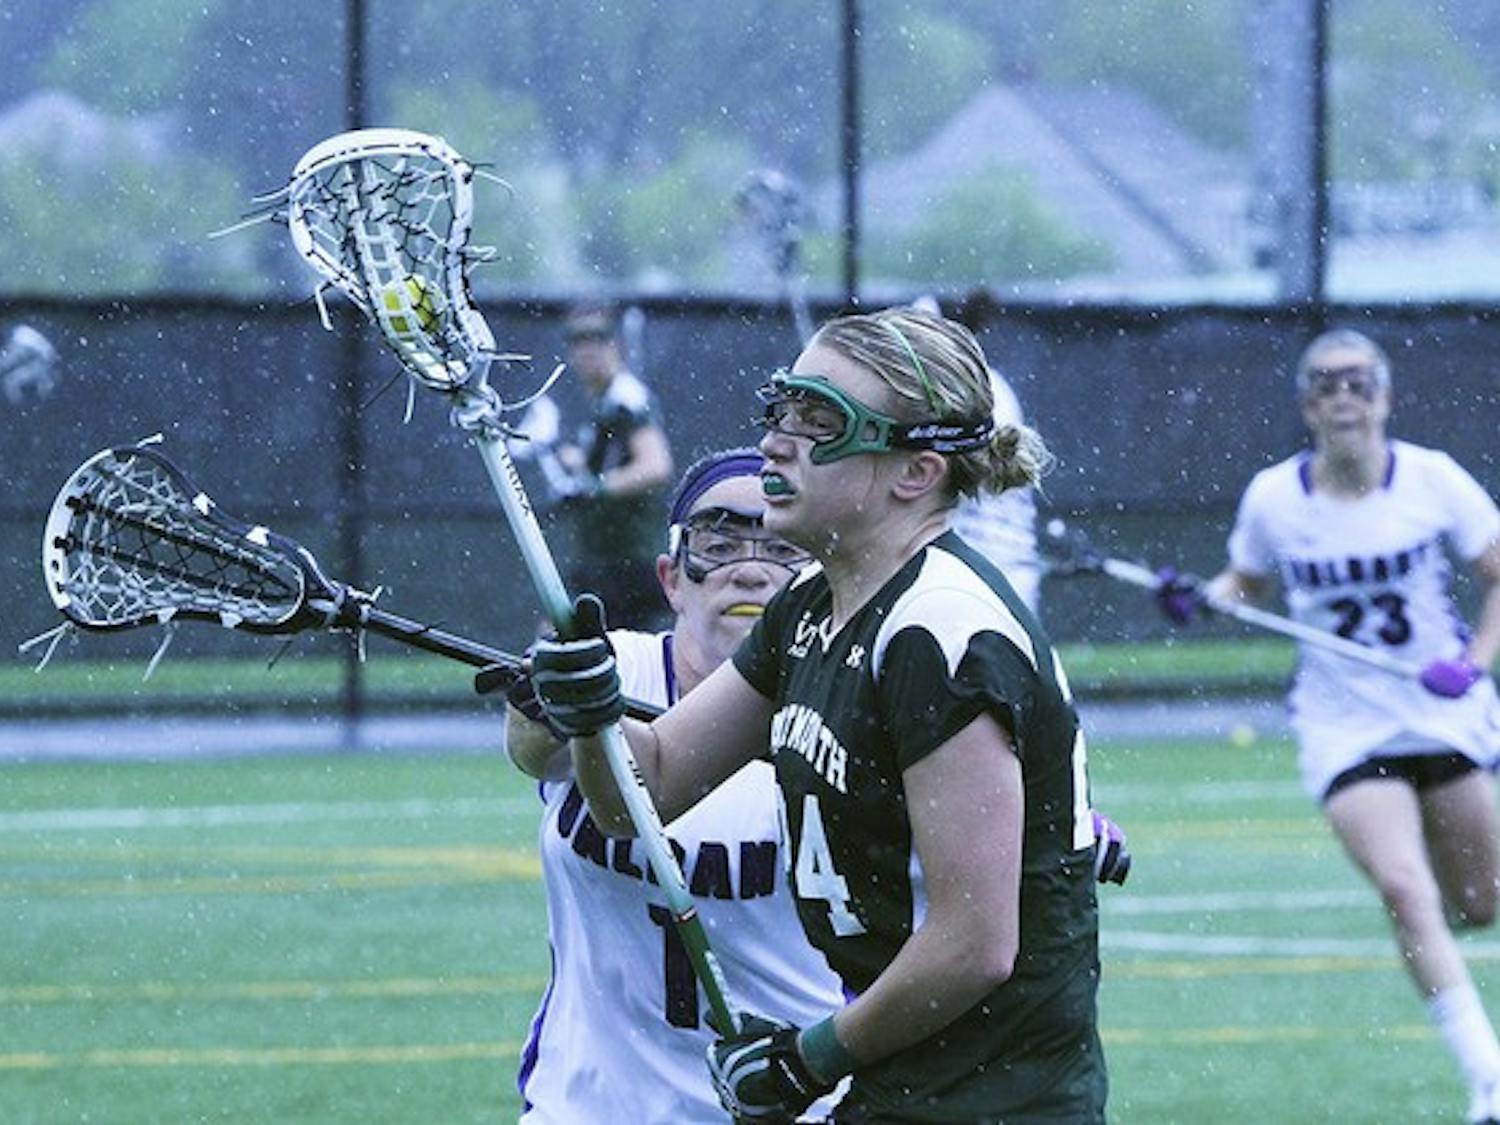 Women's lacrosse held off a second-half comeback by Brown University to secure the team's third conference victory of the season.